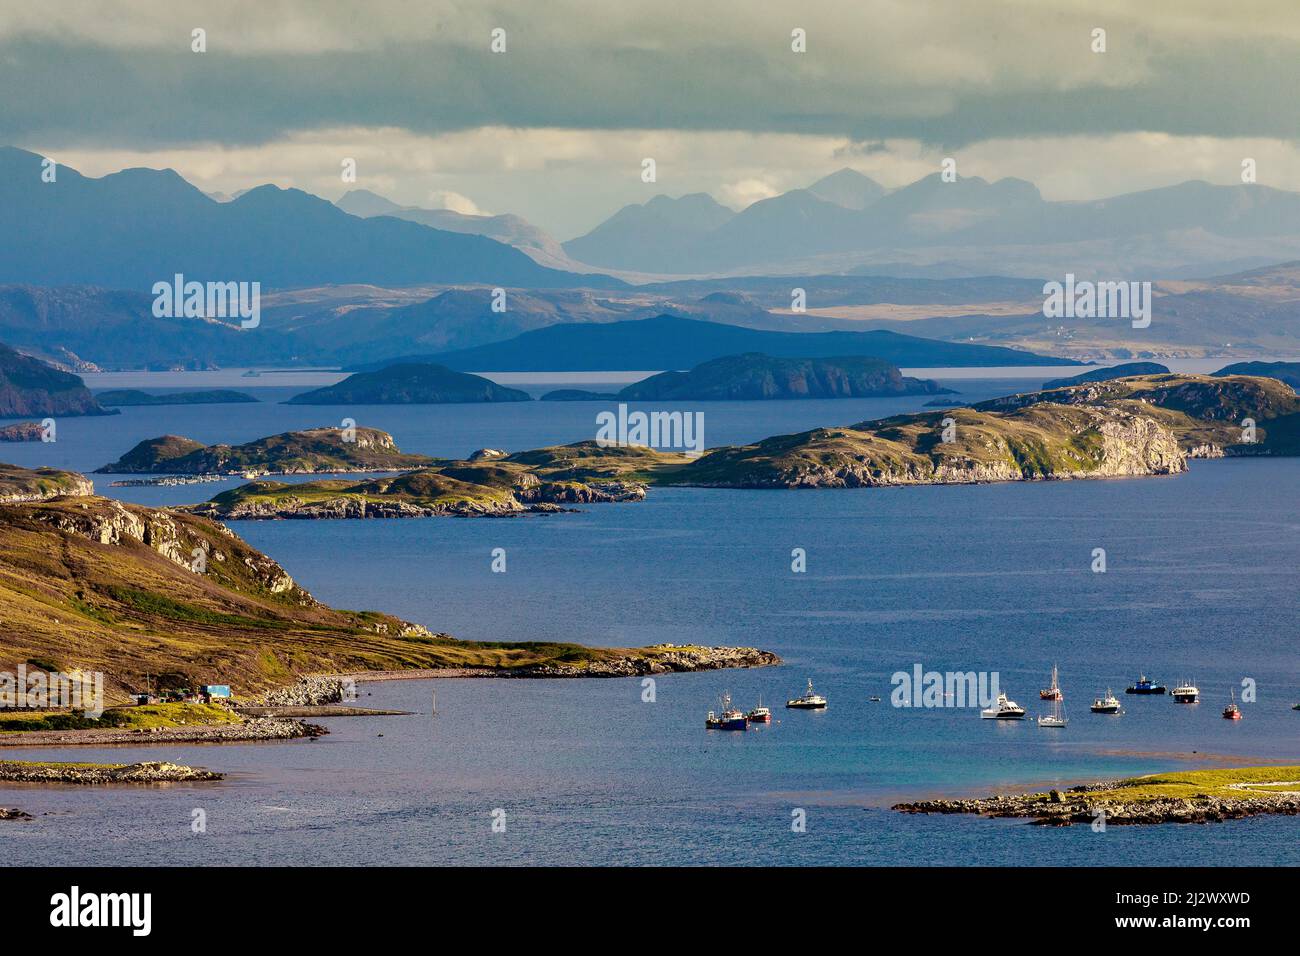 View from Coigach Peninsula, Archipelago, Tangle of Summer Isles, Wester Ross, Scotland, UK Stock Photo